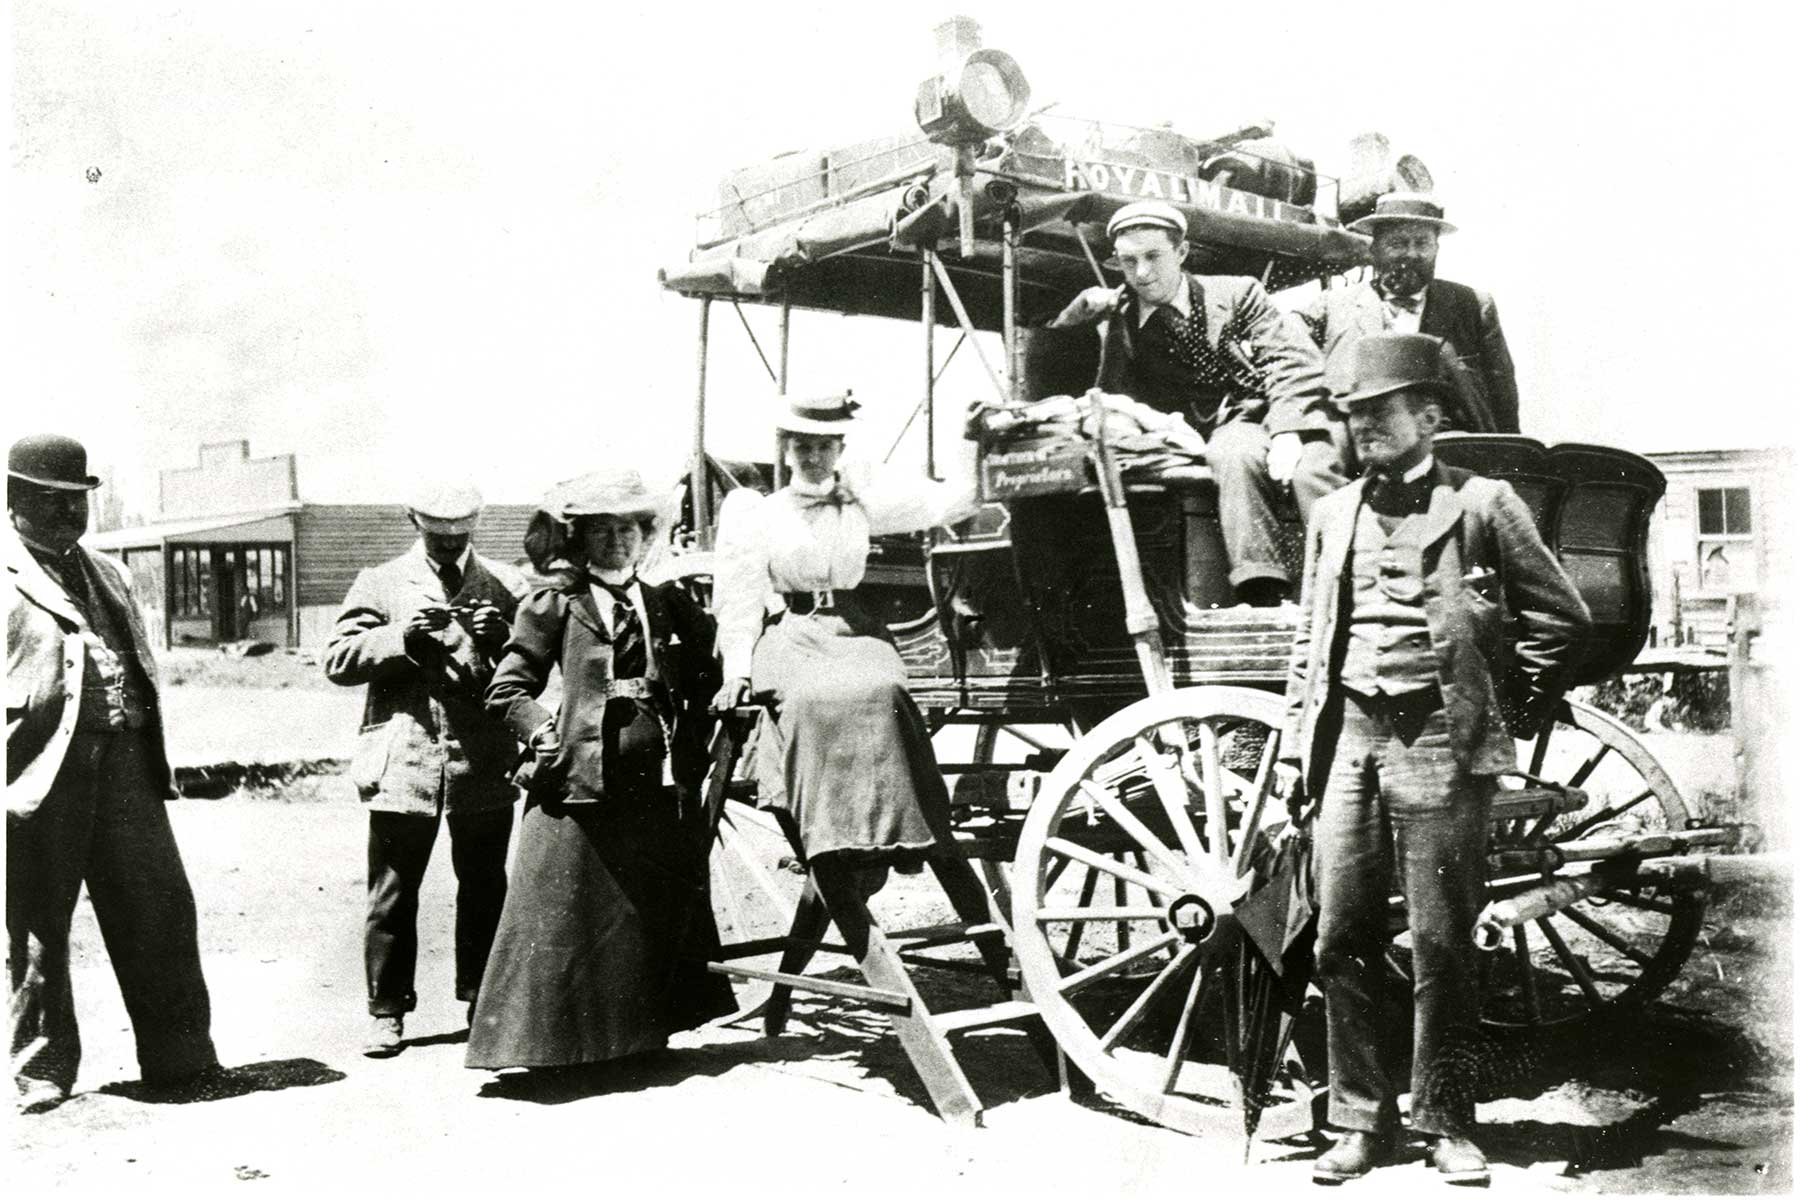 Group standing by a stage coach, New Zealand, 1897